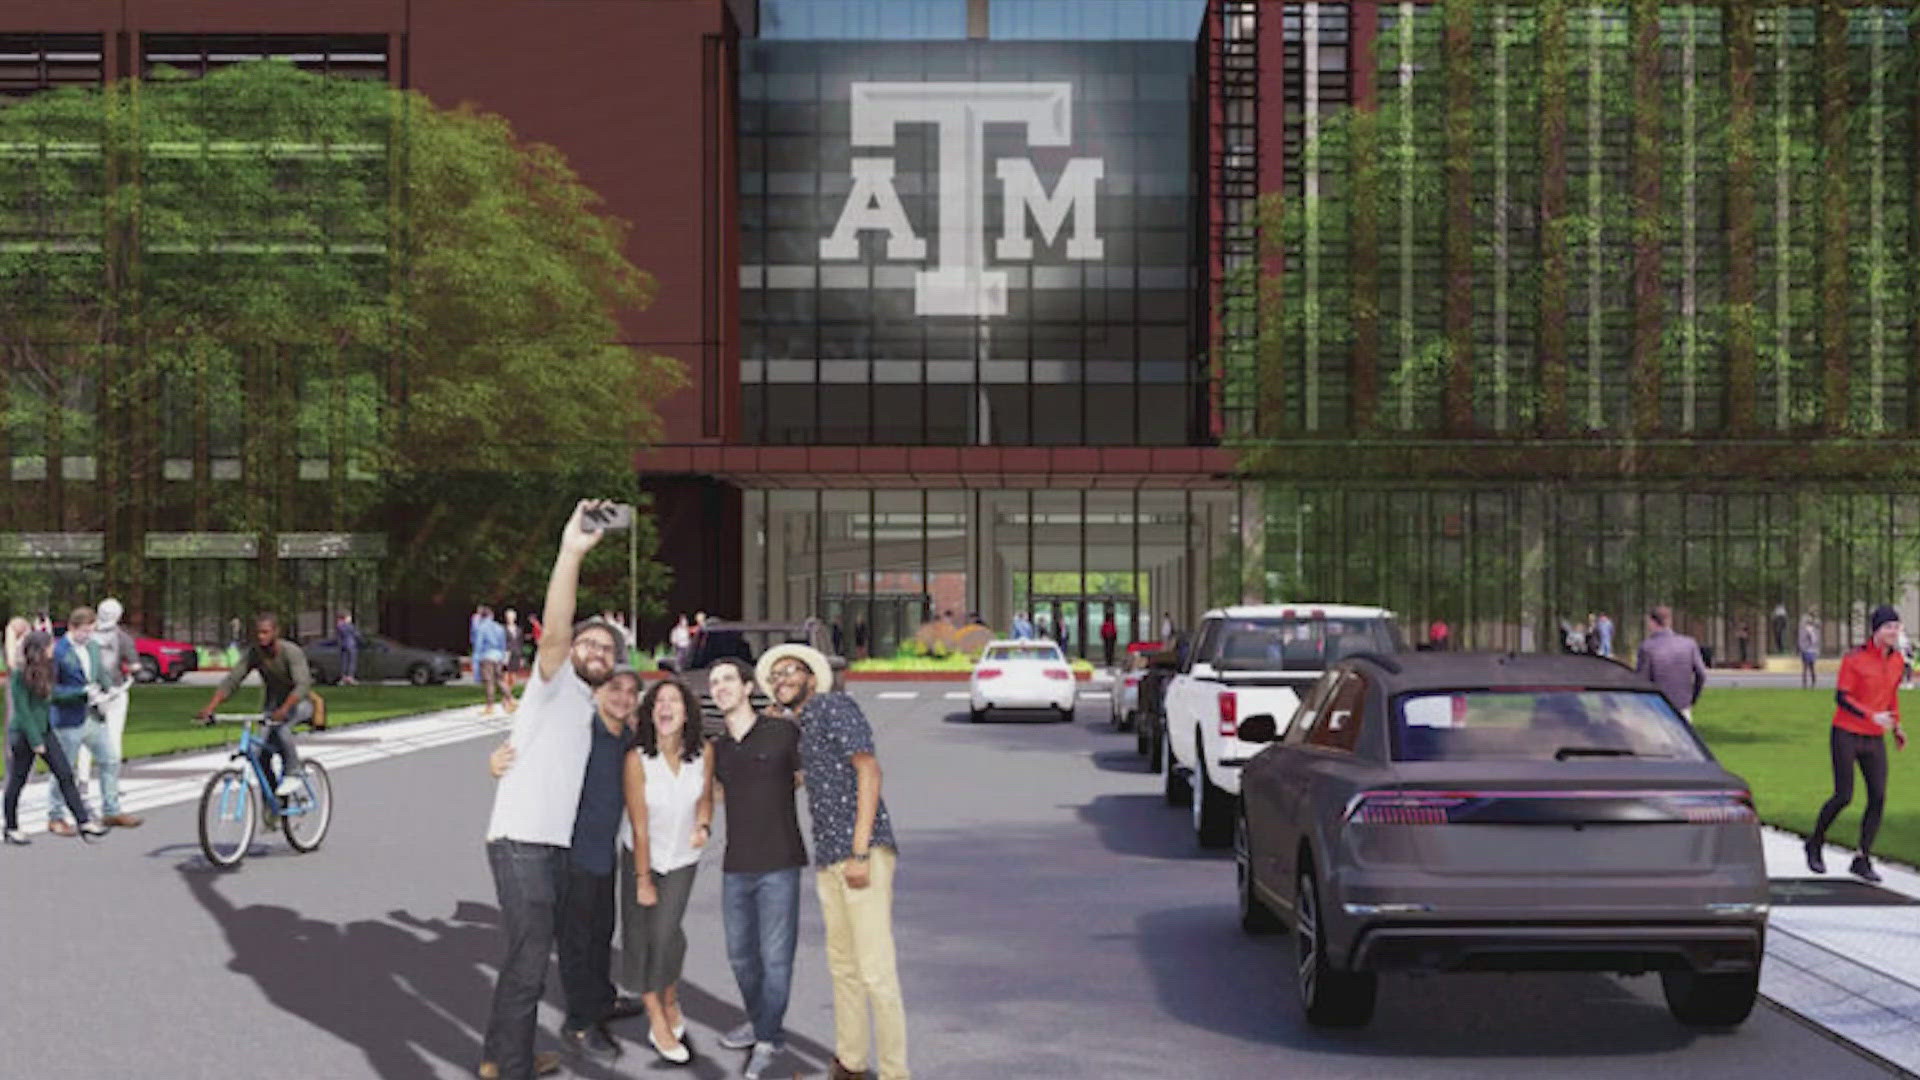 The Texas A&M University System Board of Regents vote on the expansion of the Fort Worth campus comes over a year after breaking ground on a Law & Education building